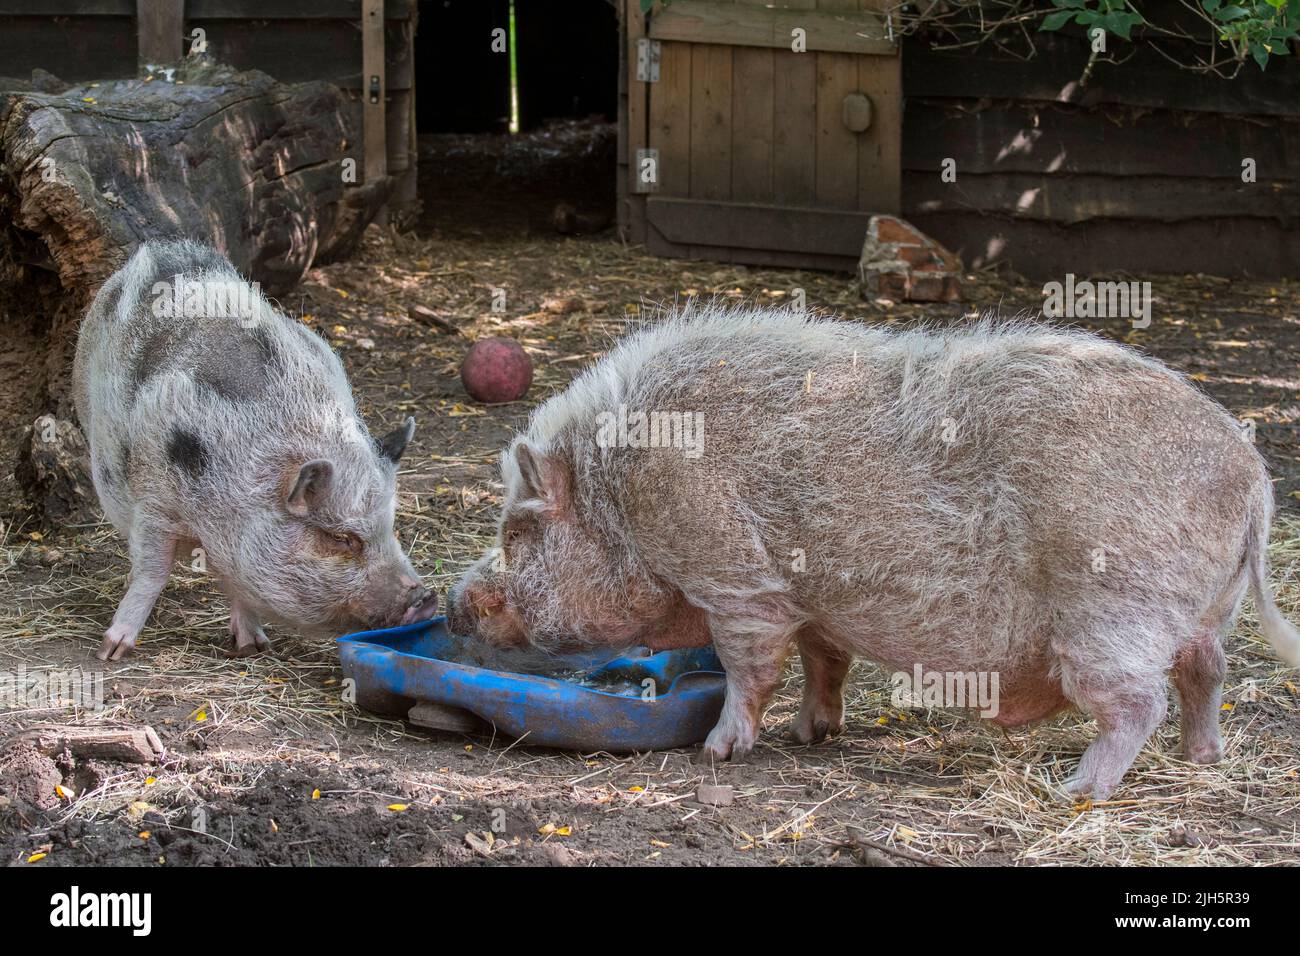 Two Vietnamese Pot-bellied pigs / Lon I pig, Vietnamese breed of miniature domestic pig eating at petting zoo / children's farm Stock Photo